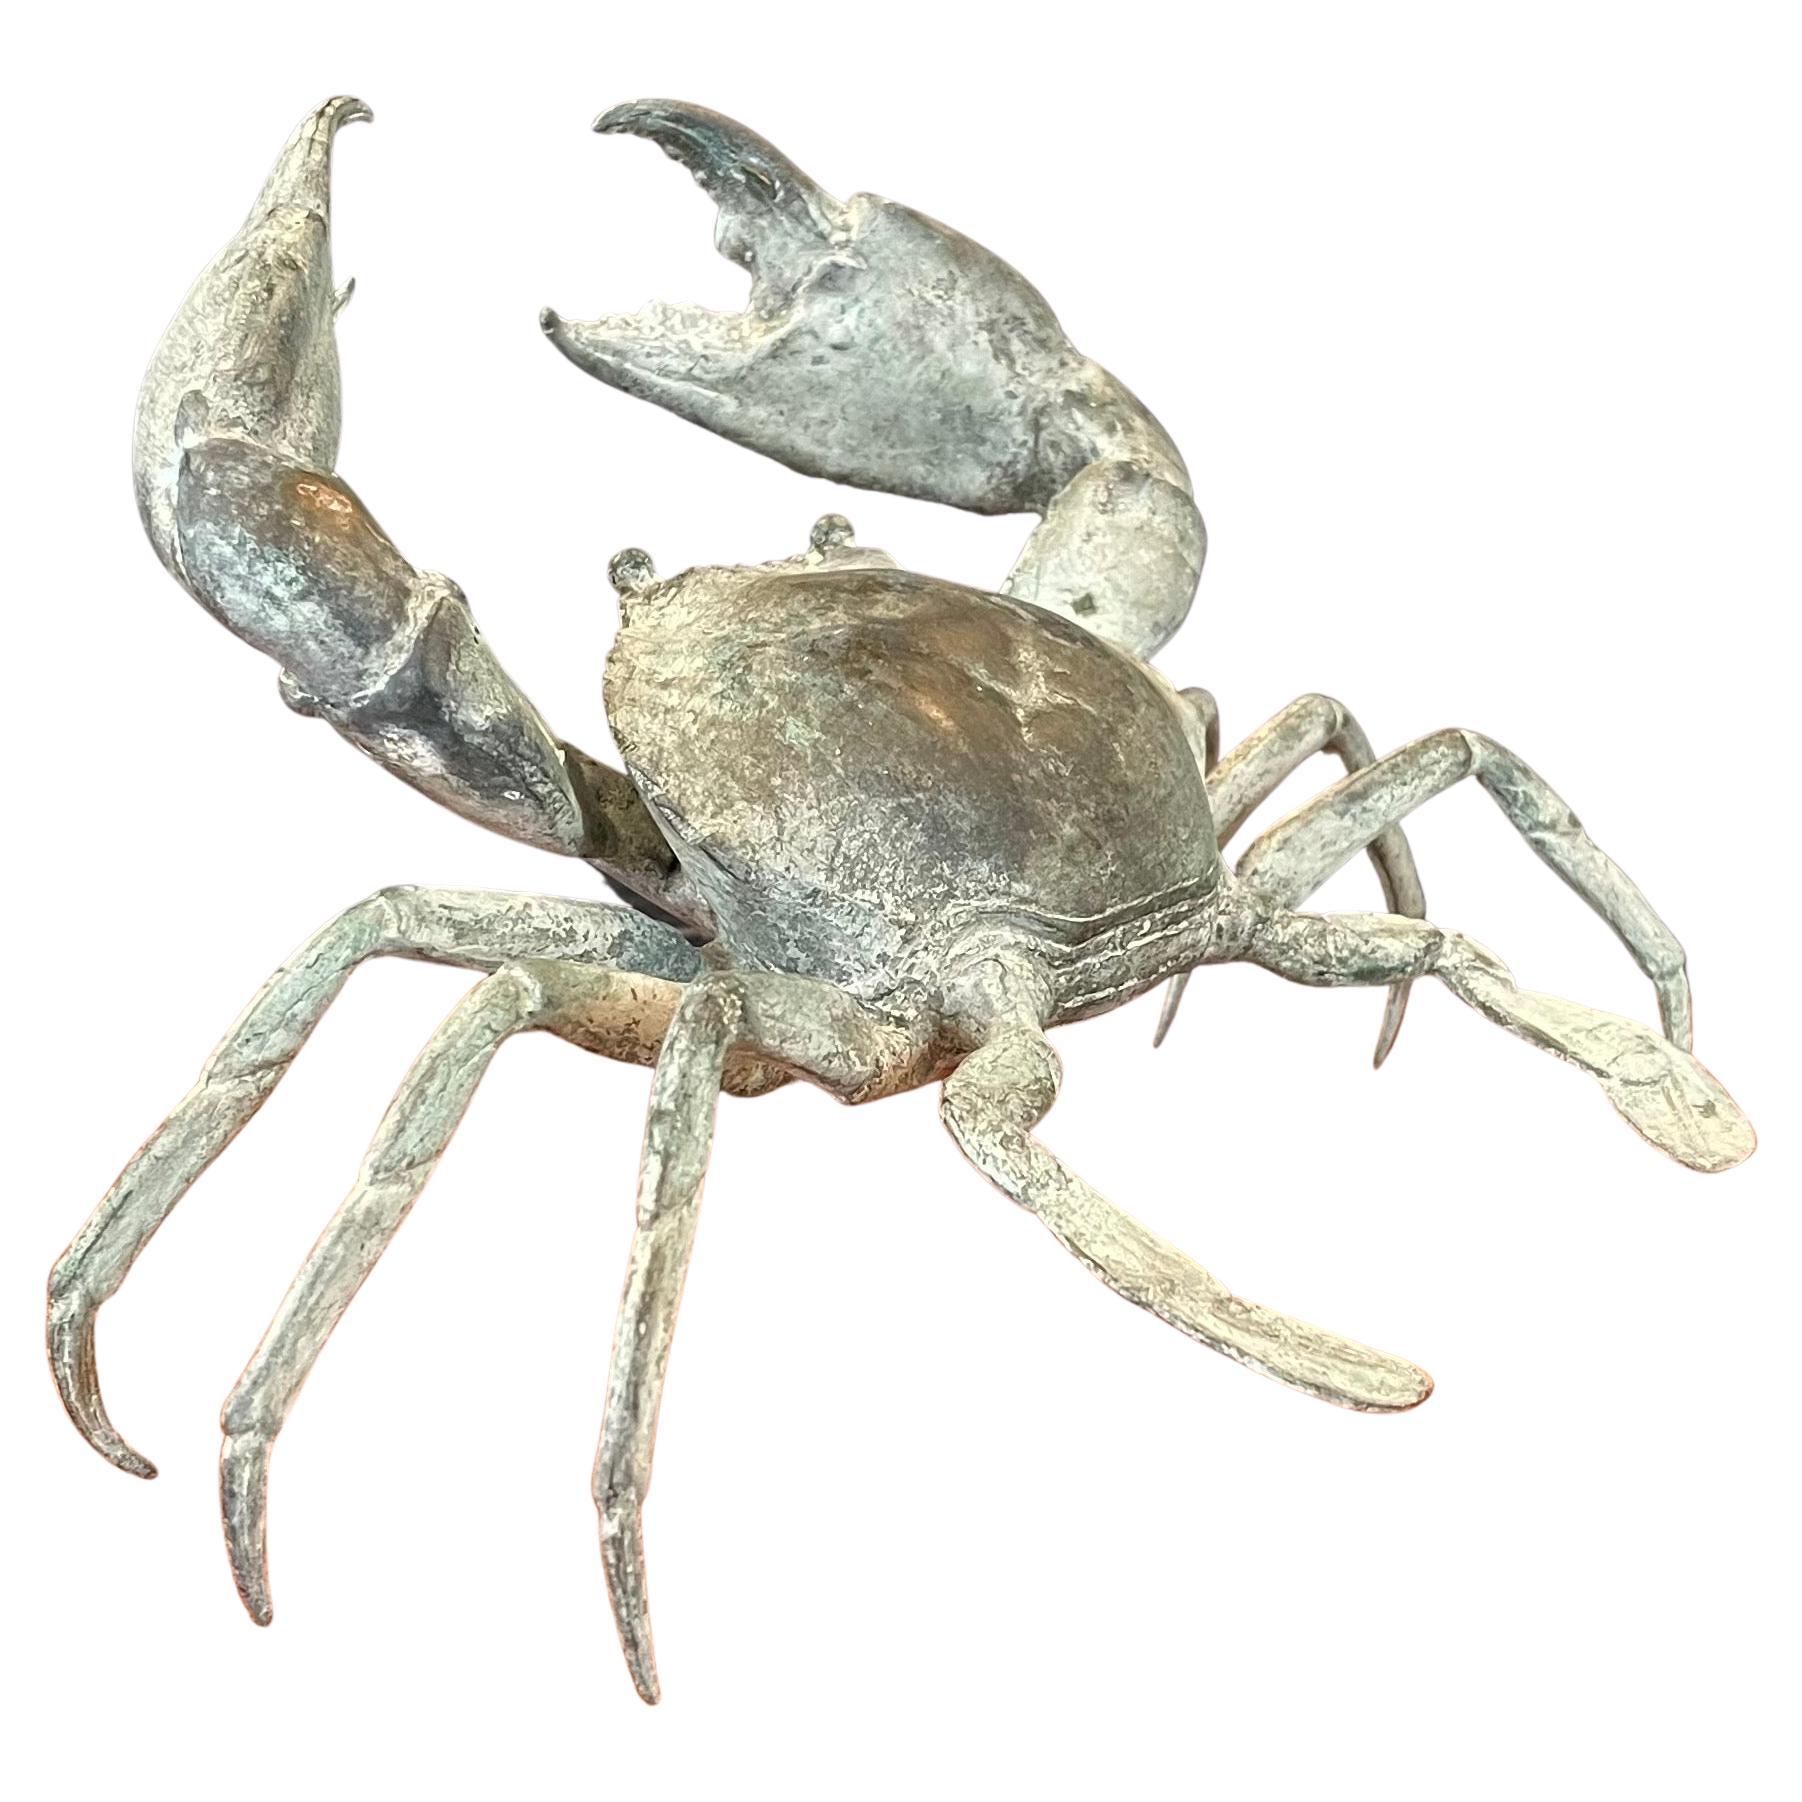 A well detailed and patinated vintage articulated bronze crab sculpture, circa 1970s. The piece is in very good vintage condition and quite large: it measures 12